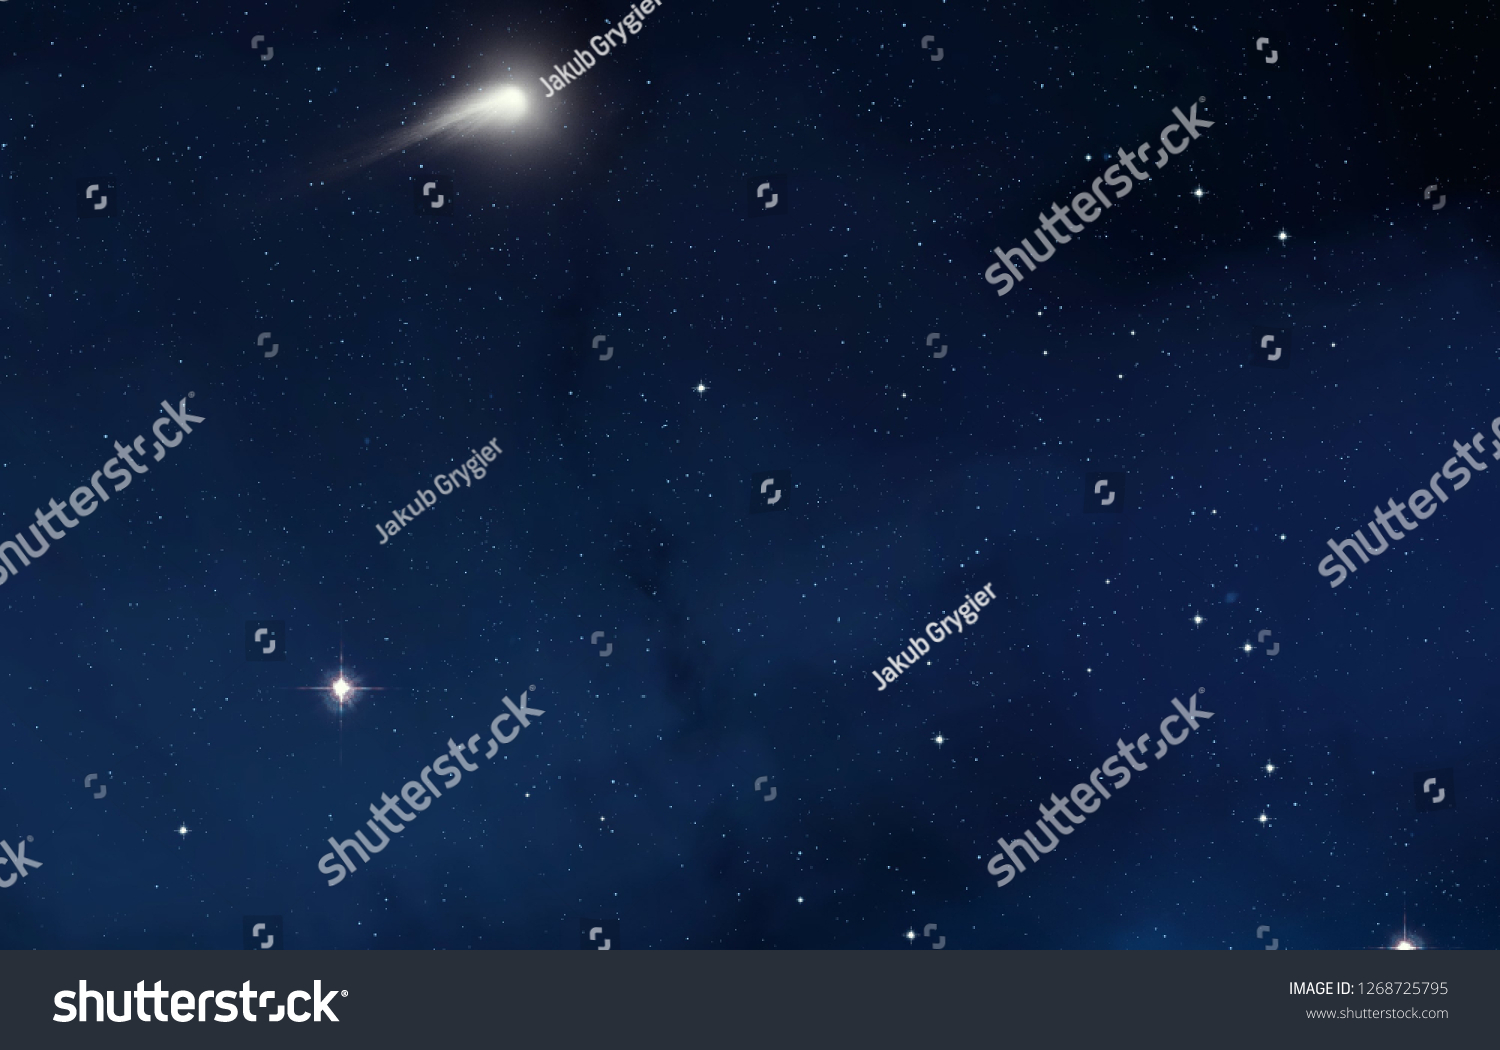 2d illustration. Deep interstellar space. Stars, planets and moons and comets. Various science fiction creative backdrops. Space art. #1268725795